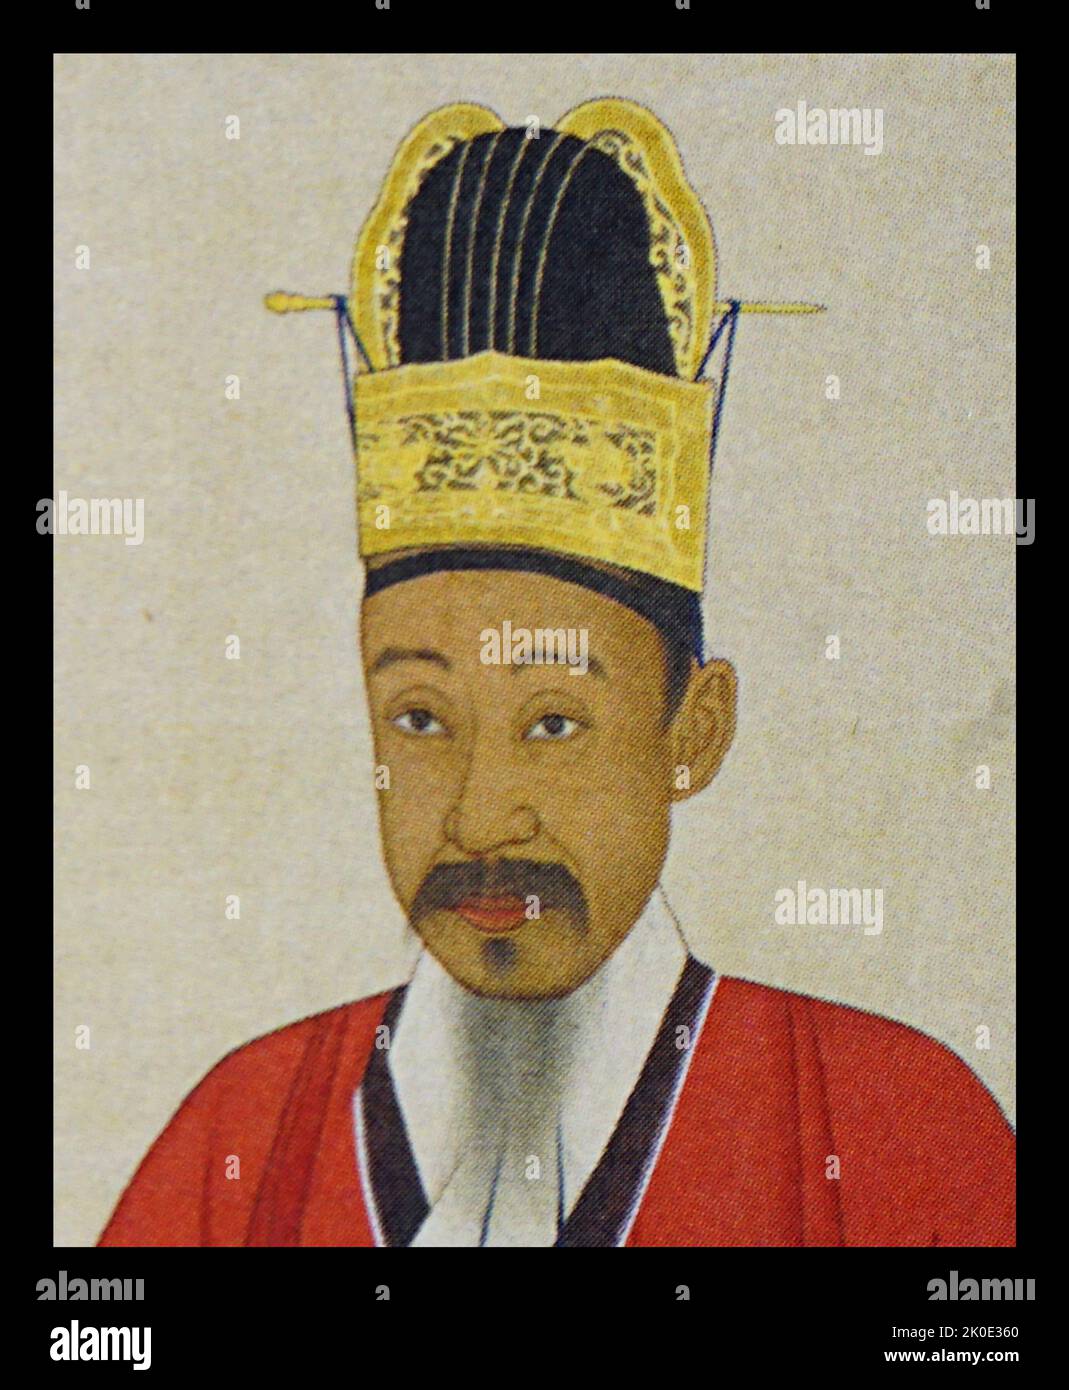 Heungseon Daewongun (1820 - 1898). Grand Internal Prince Heungseon, also known as the Daewongun Guktaegong, Great Archduke, Prince Gung, was the title of Yi Ha-eung, the regent of Joseon during the minority of Emperor Gojong in the 1860s and until his death a key political figure of late Joseon Korea. Stock Photo